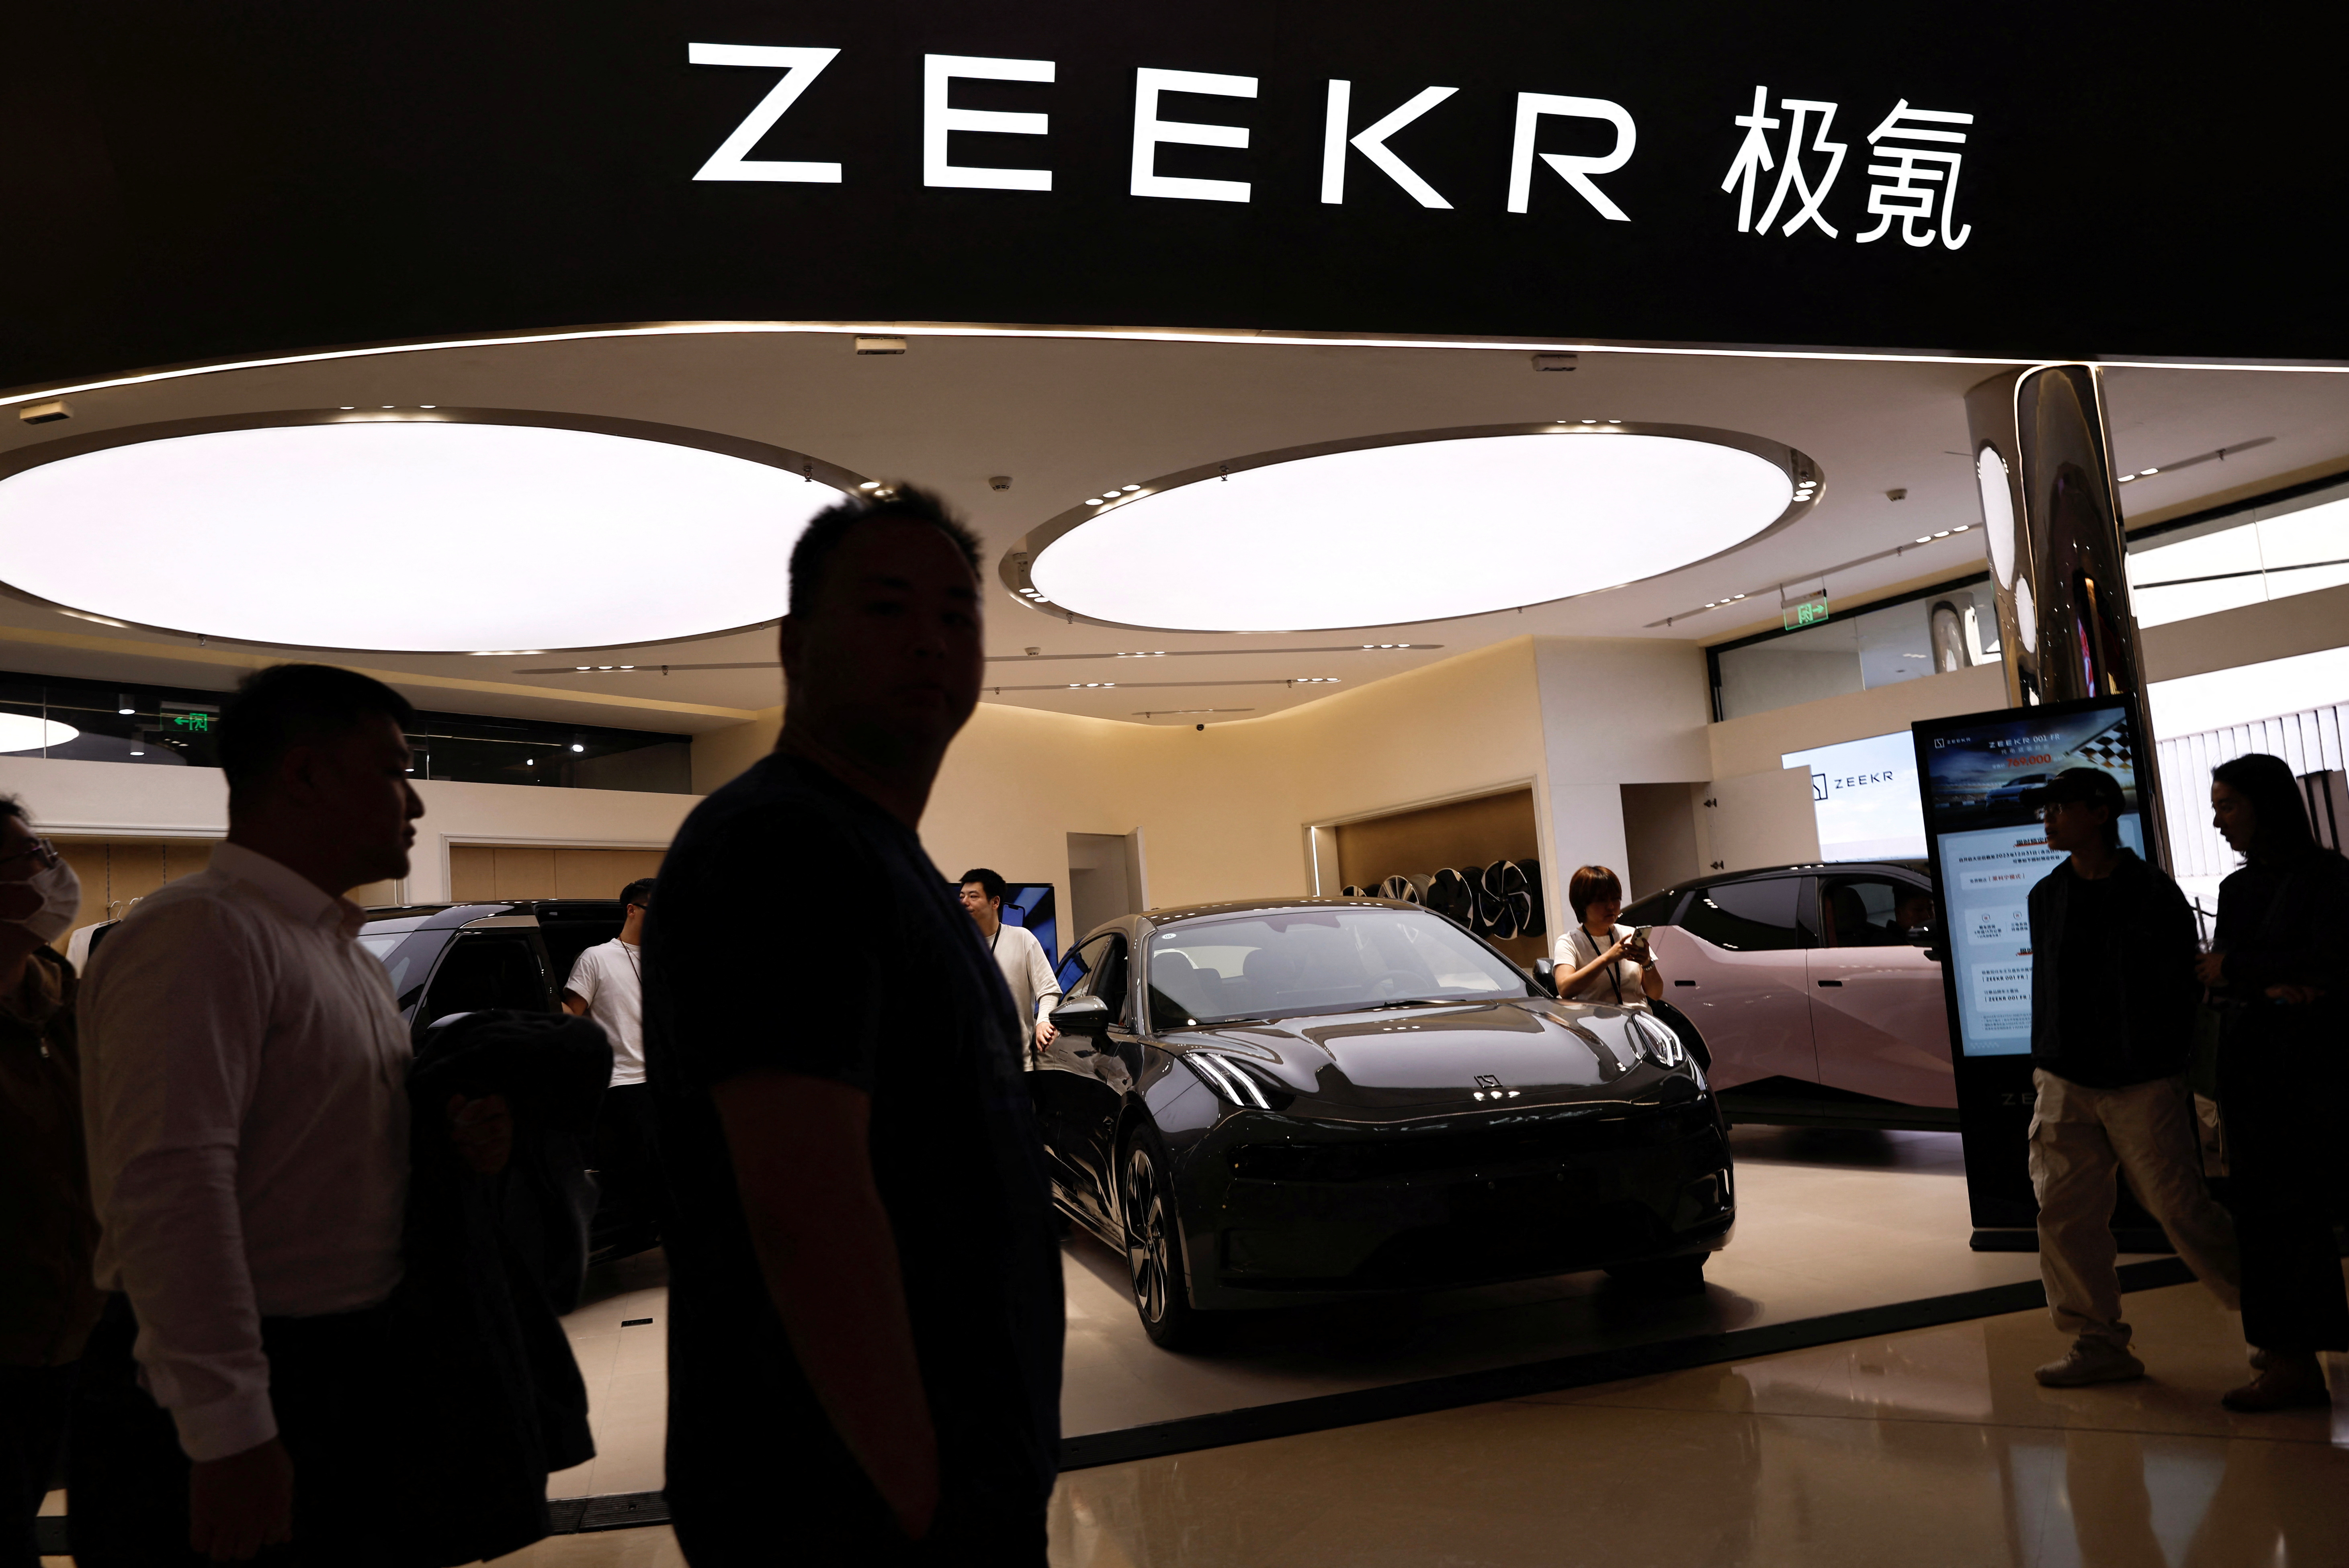 People walk past a booth of Zeekr, Chinese automaker Geely's premium electric vehicle (EV) brand, at a shopping mall in Beijing